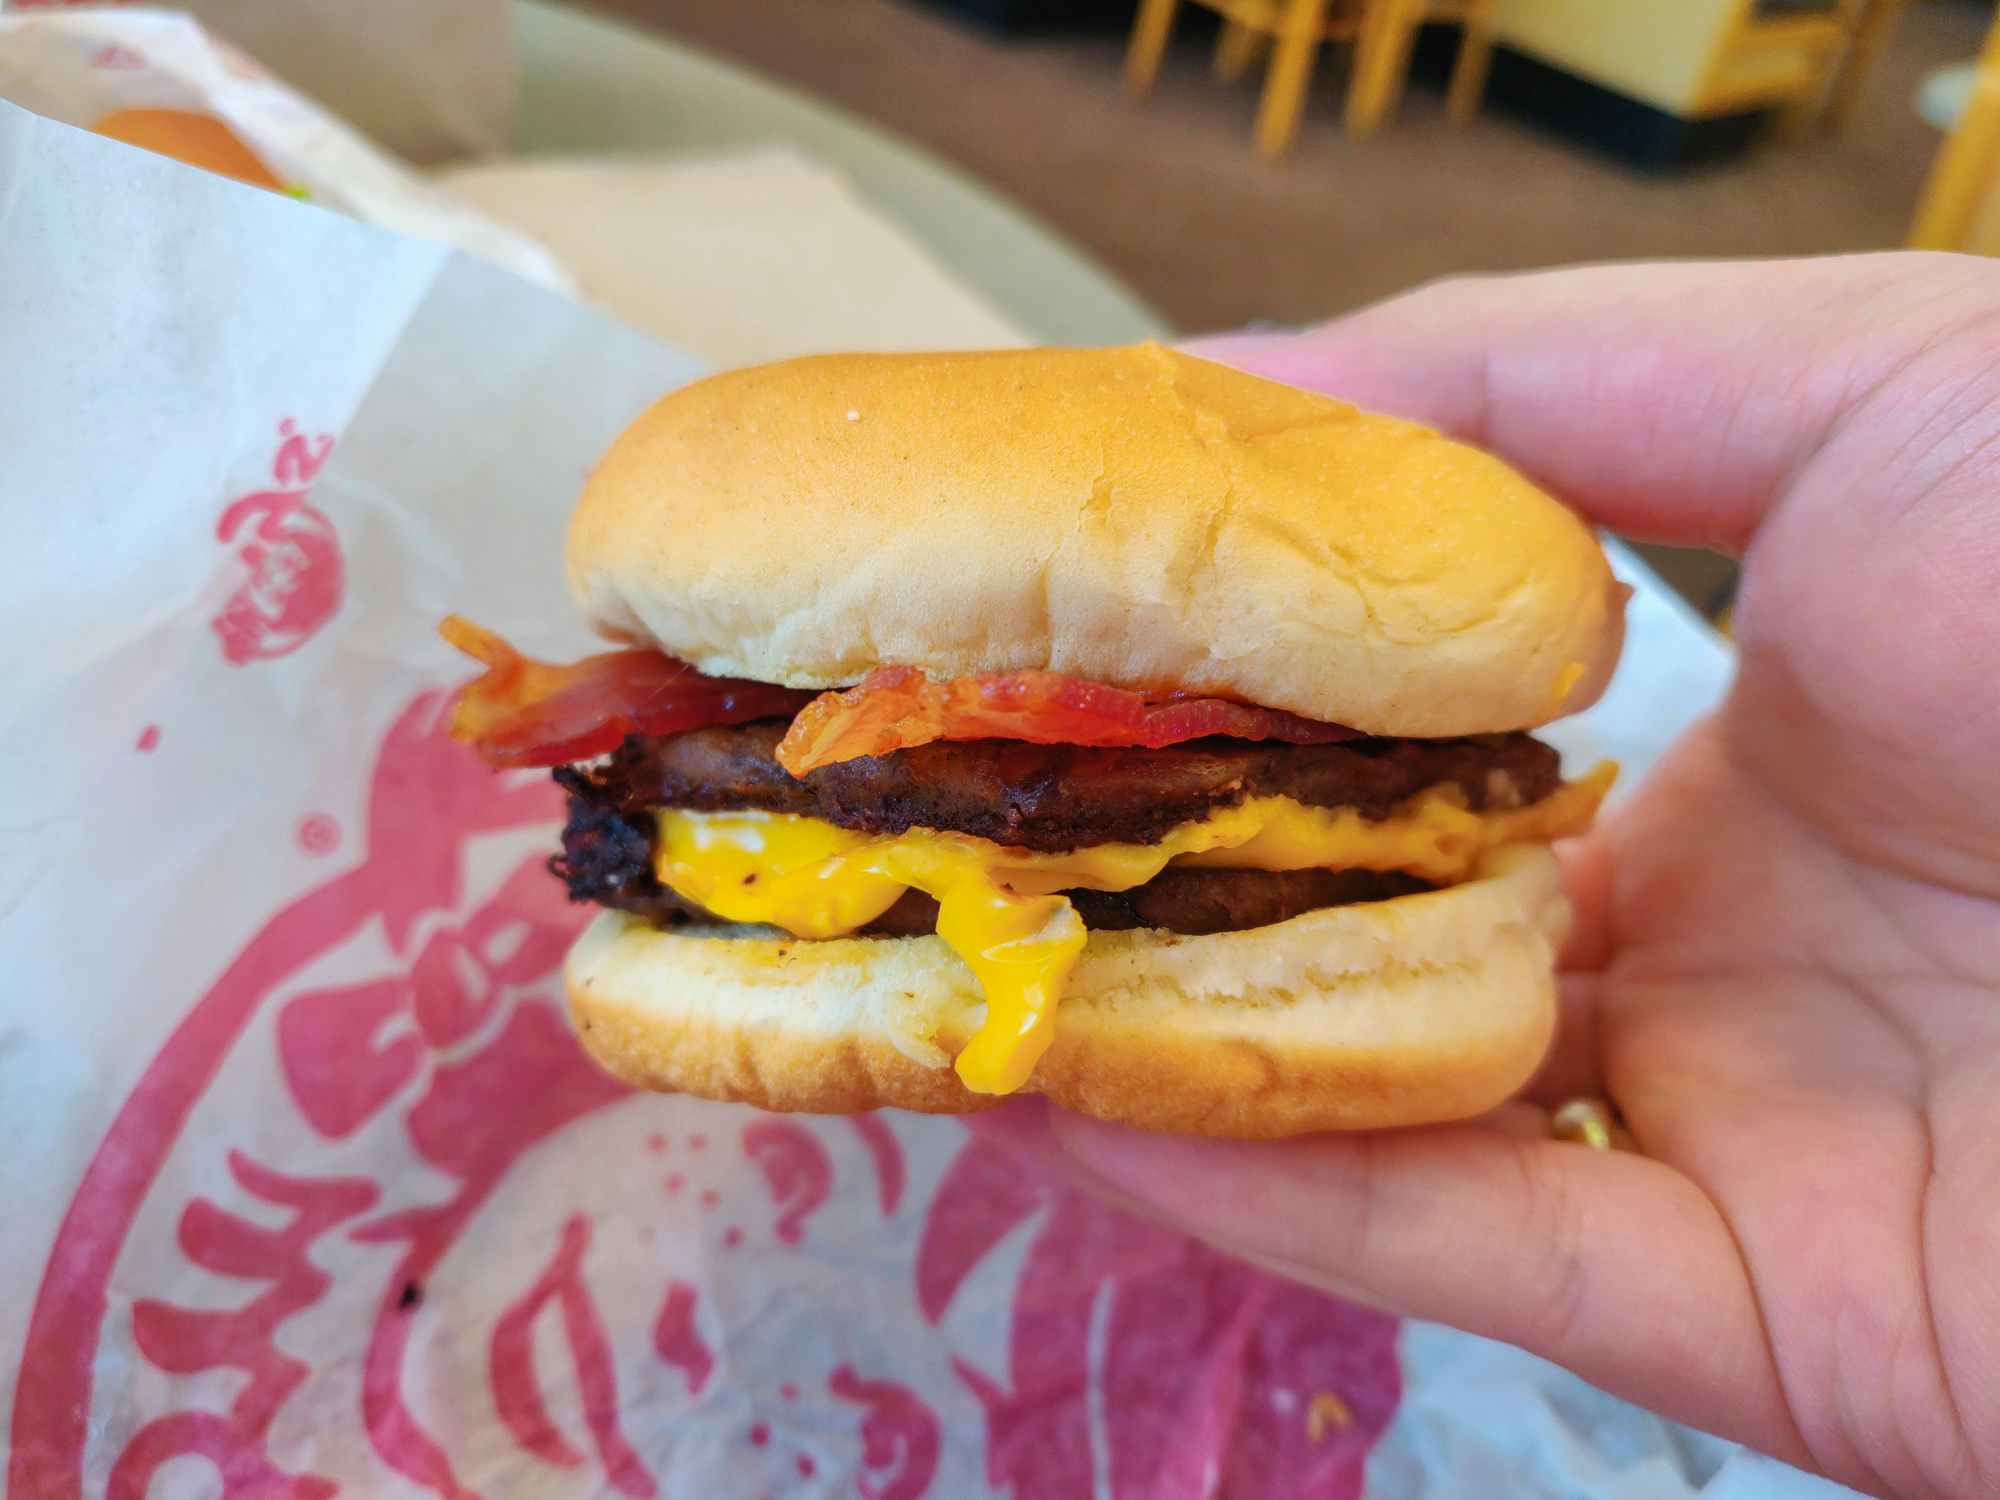 The 13 Best National Cheeseburger Day Deals Of 2023